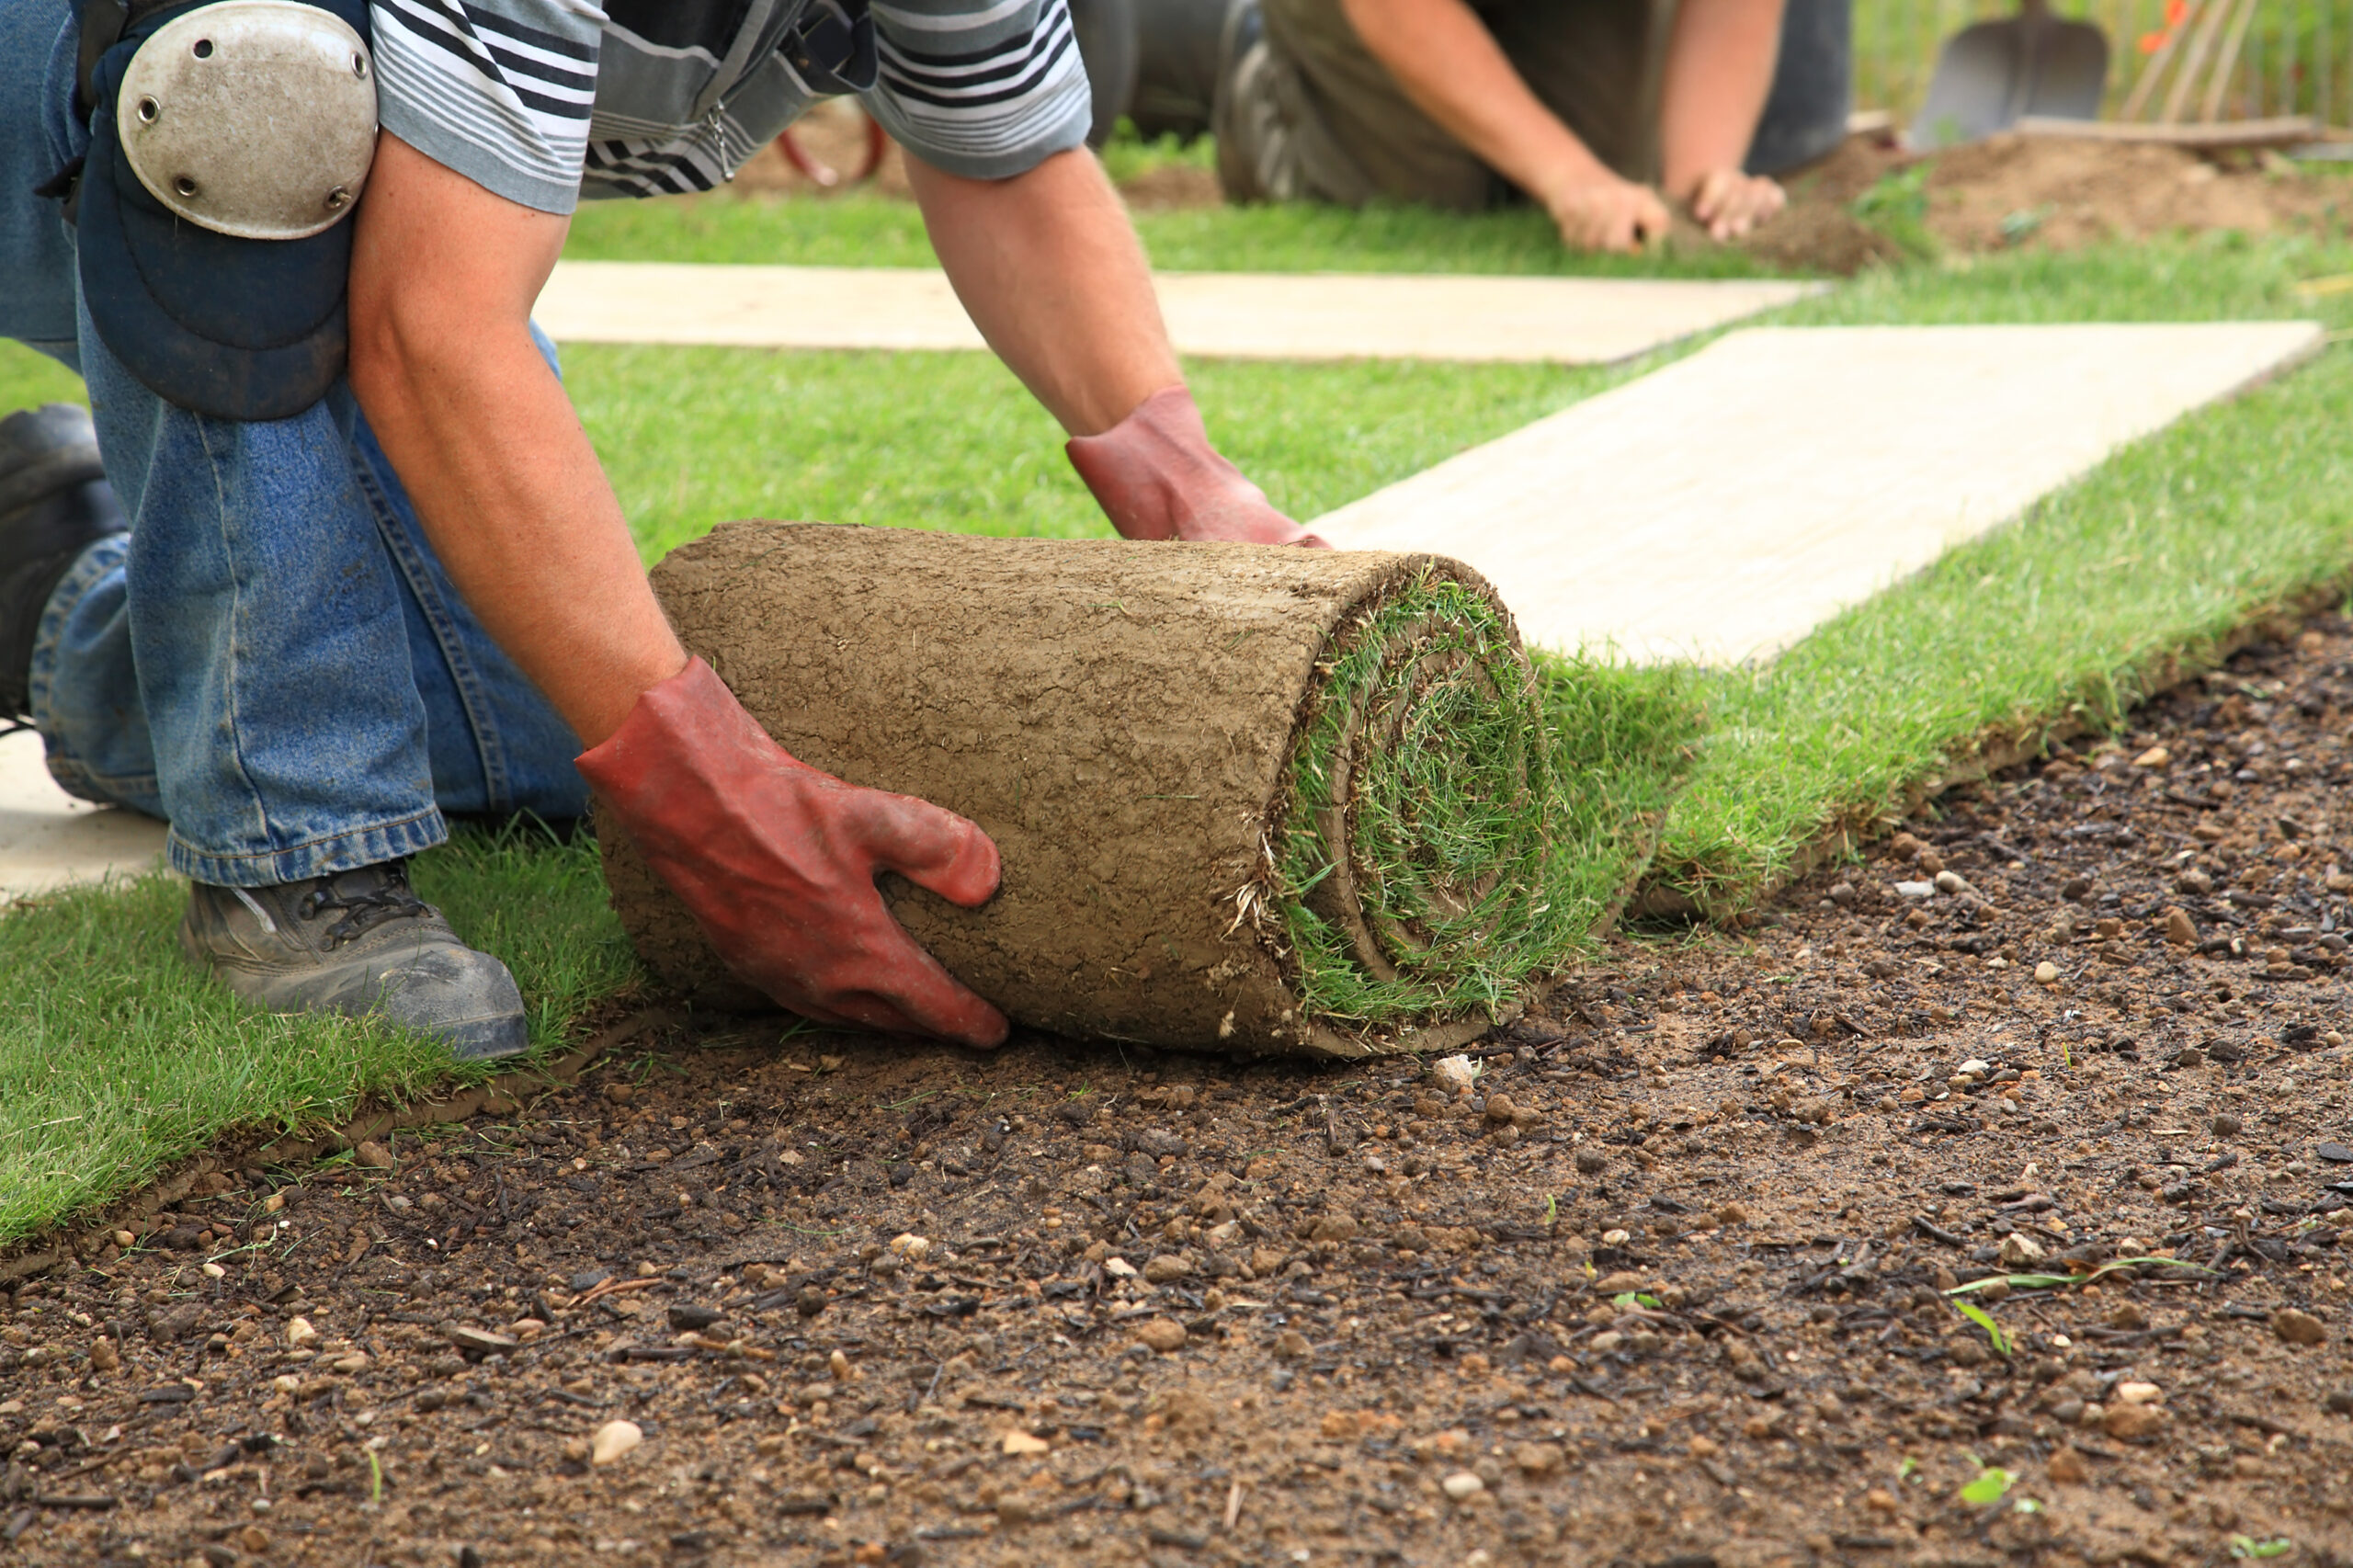 Outdoor living expert laying sod/grass down